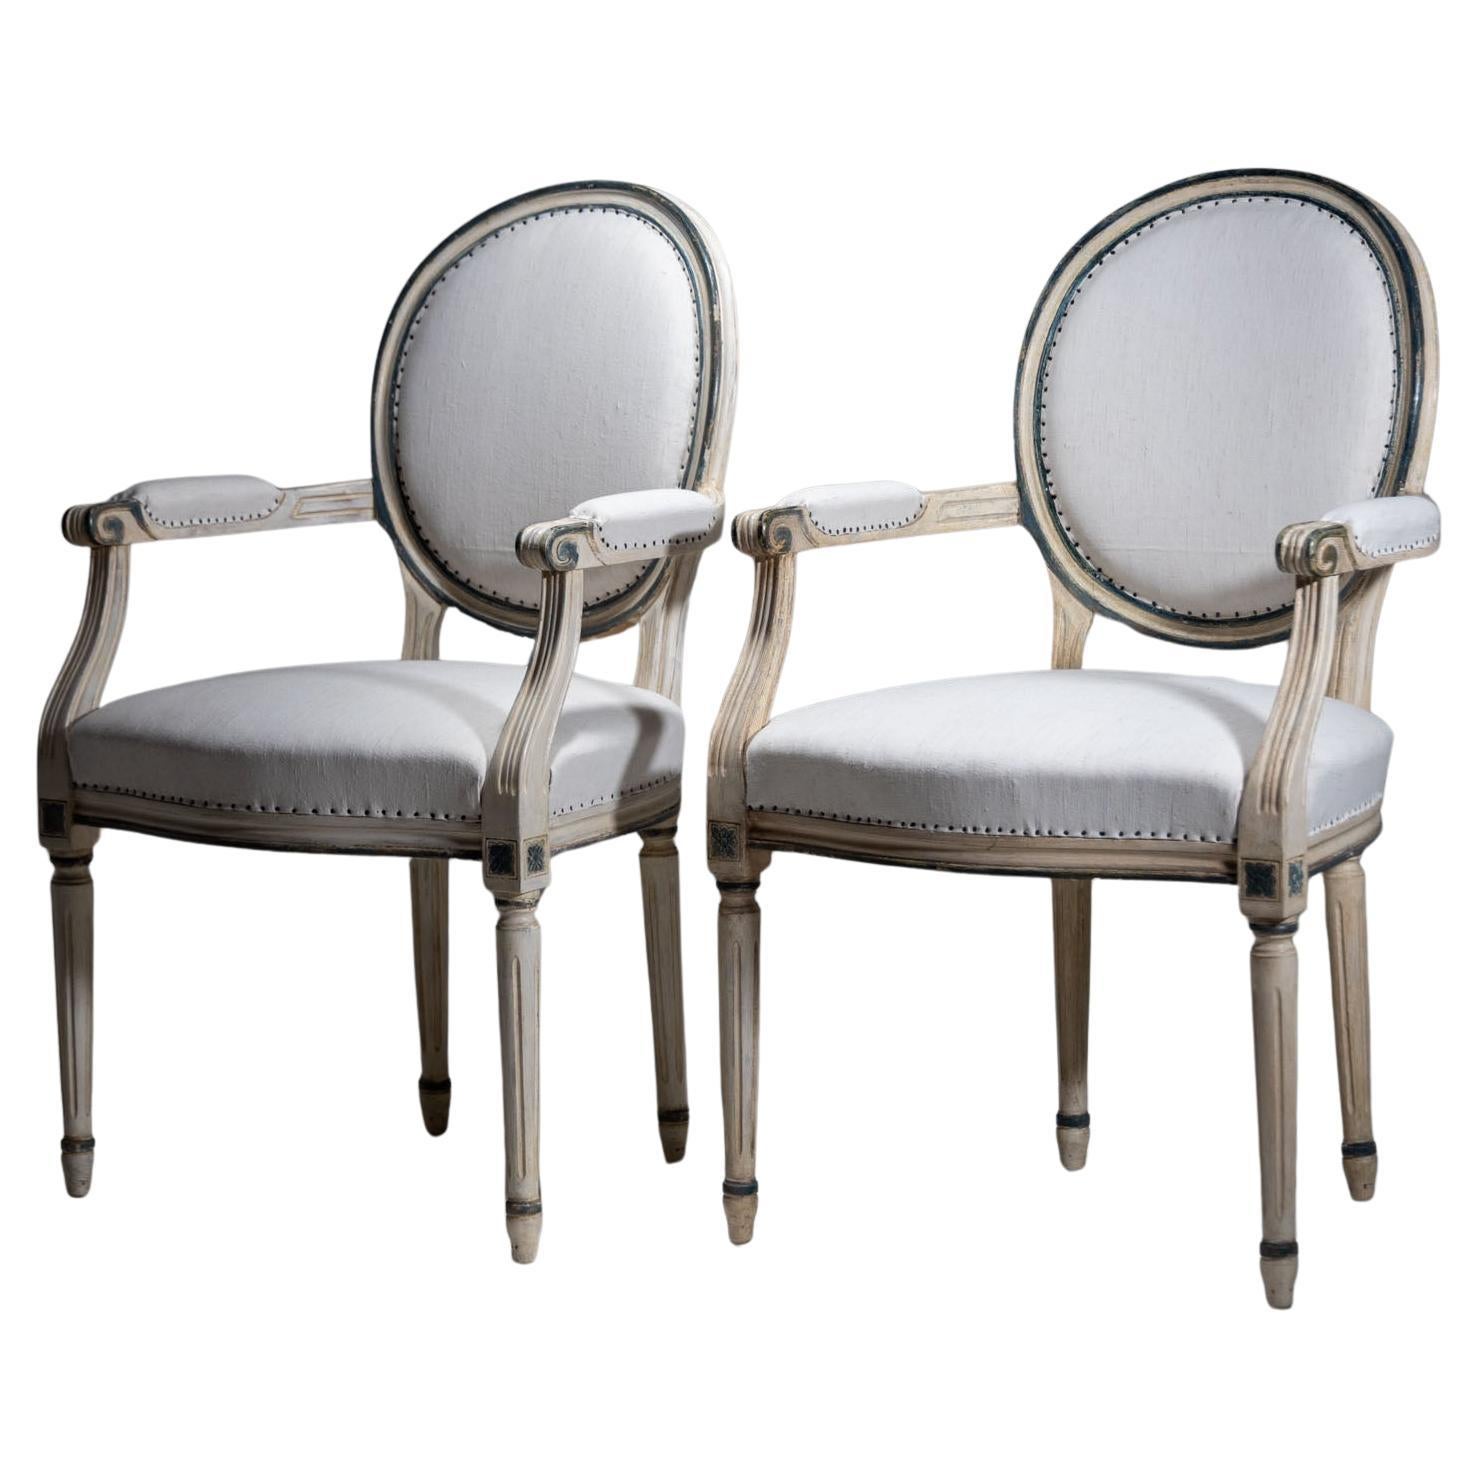 Pair of Gustavian-style medallion chairs, late 19th century For Sale